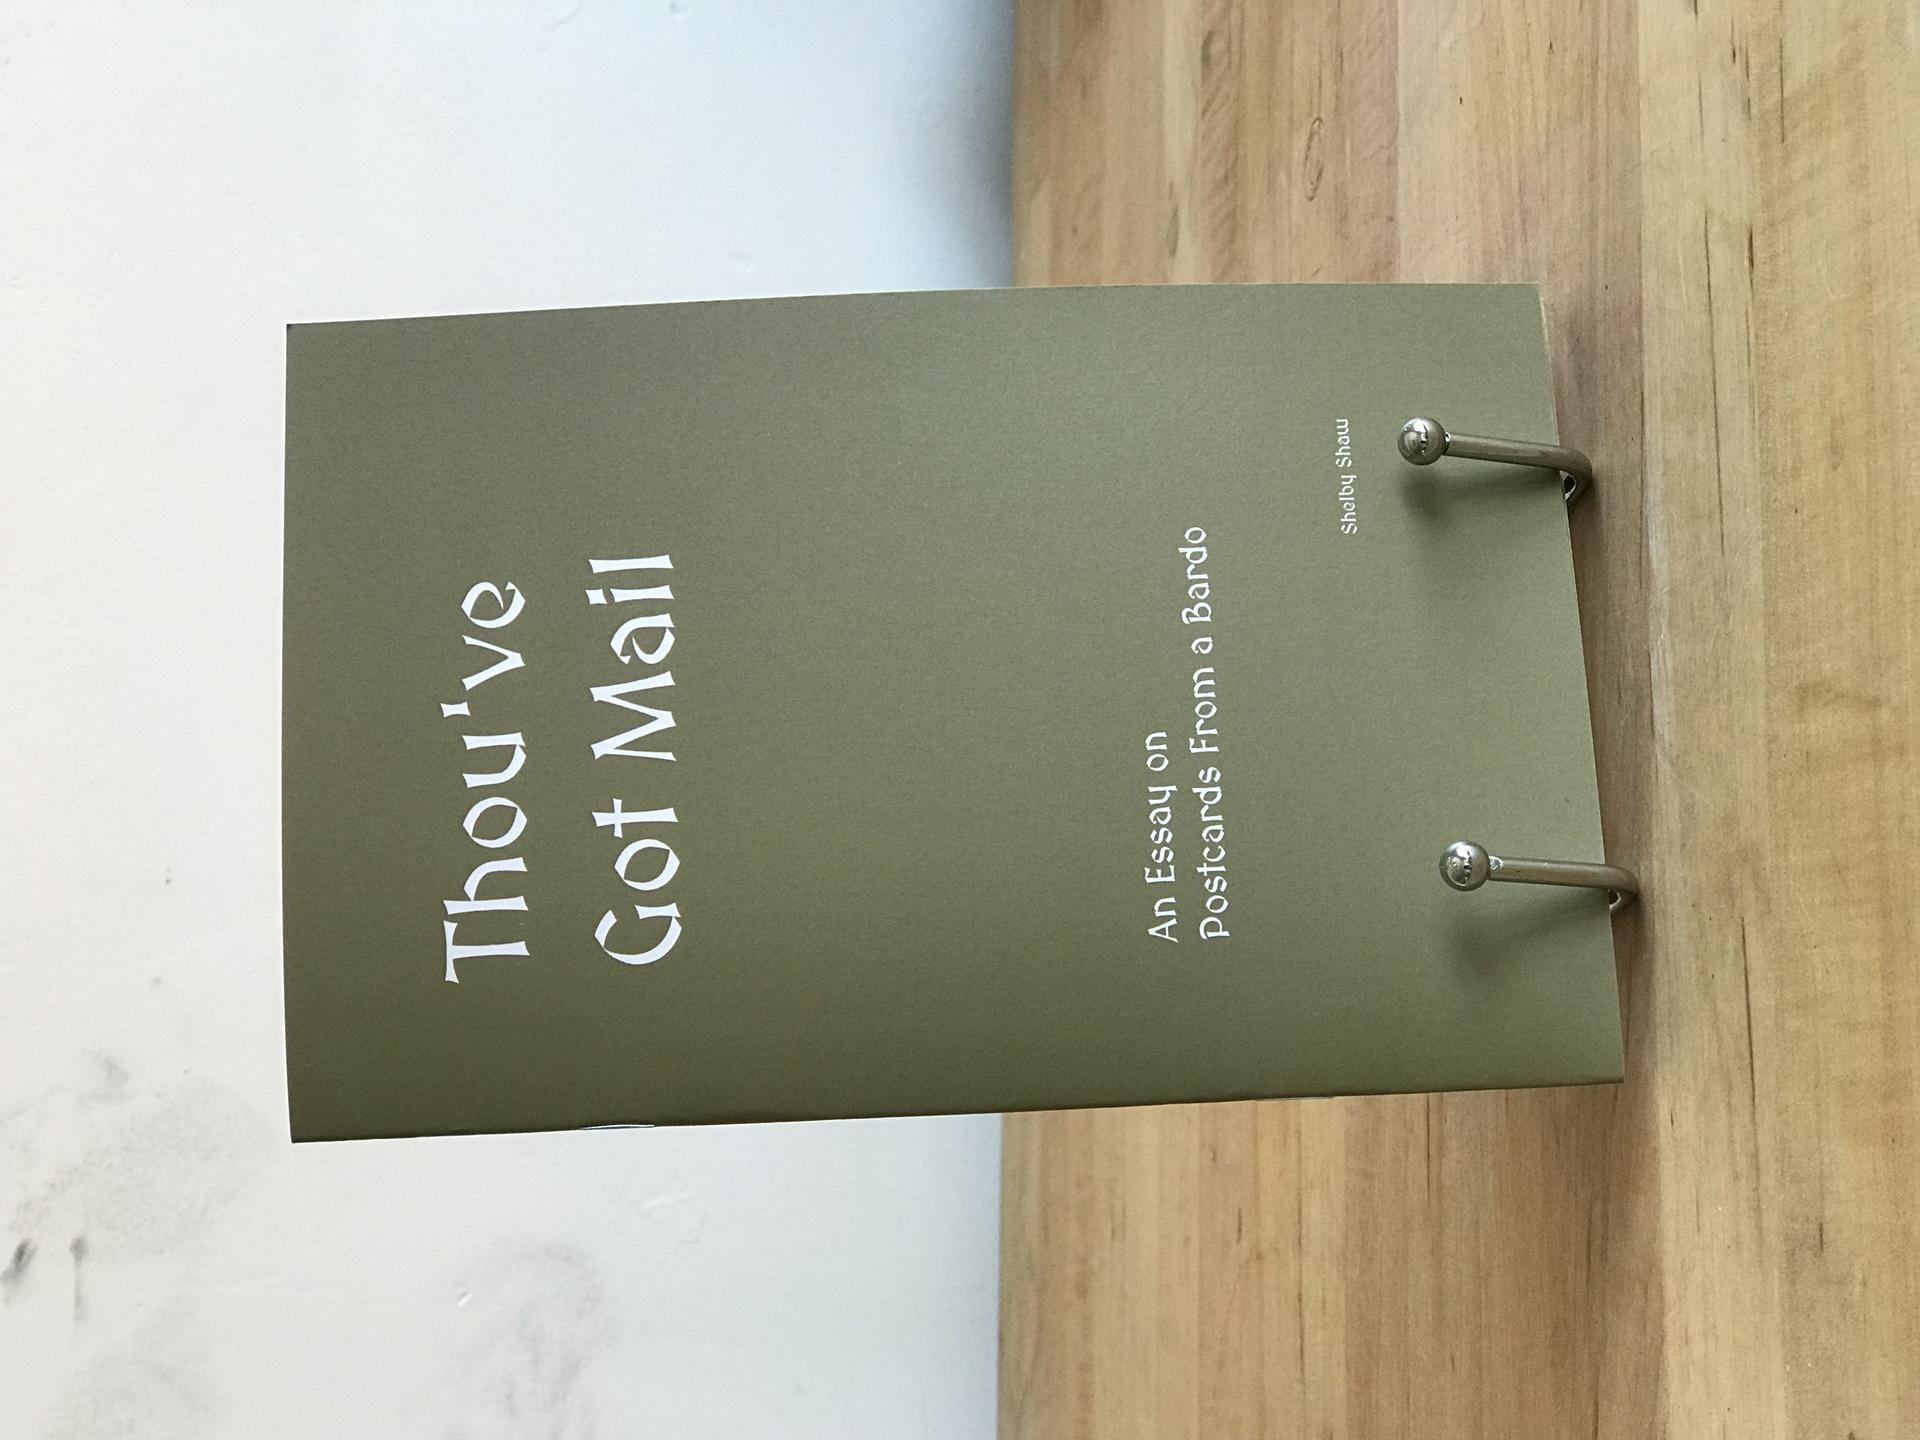 The book 'Thou've Got Mail' which is a khaki green-brown color with white font is displayed on a silver book stand atop a wooden tabletop with a white wall in the background.